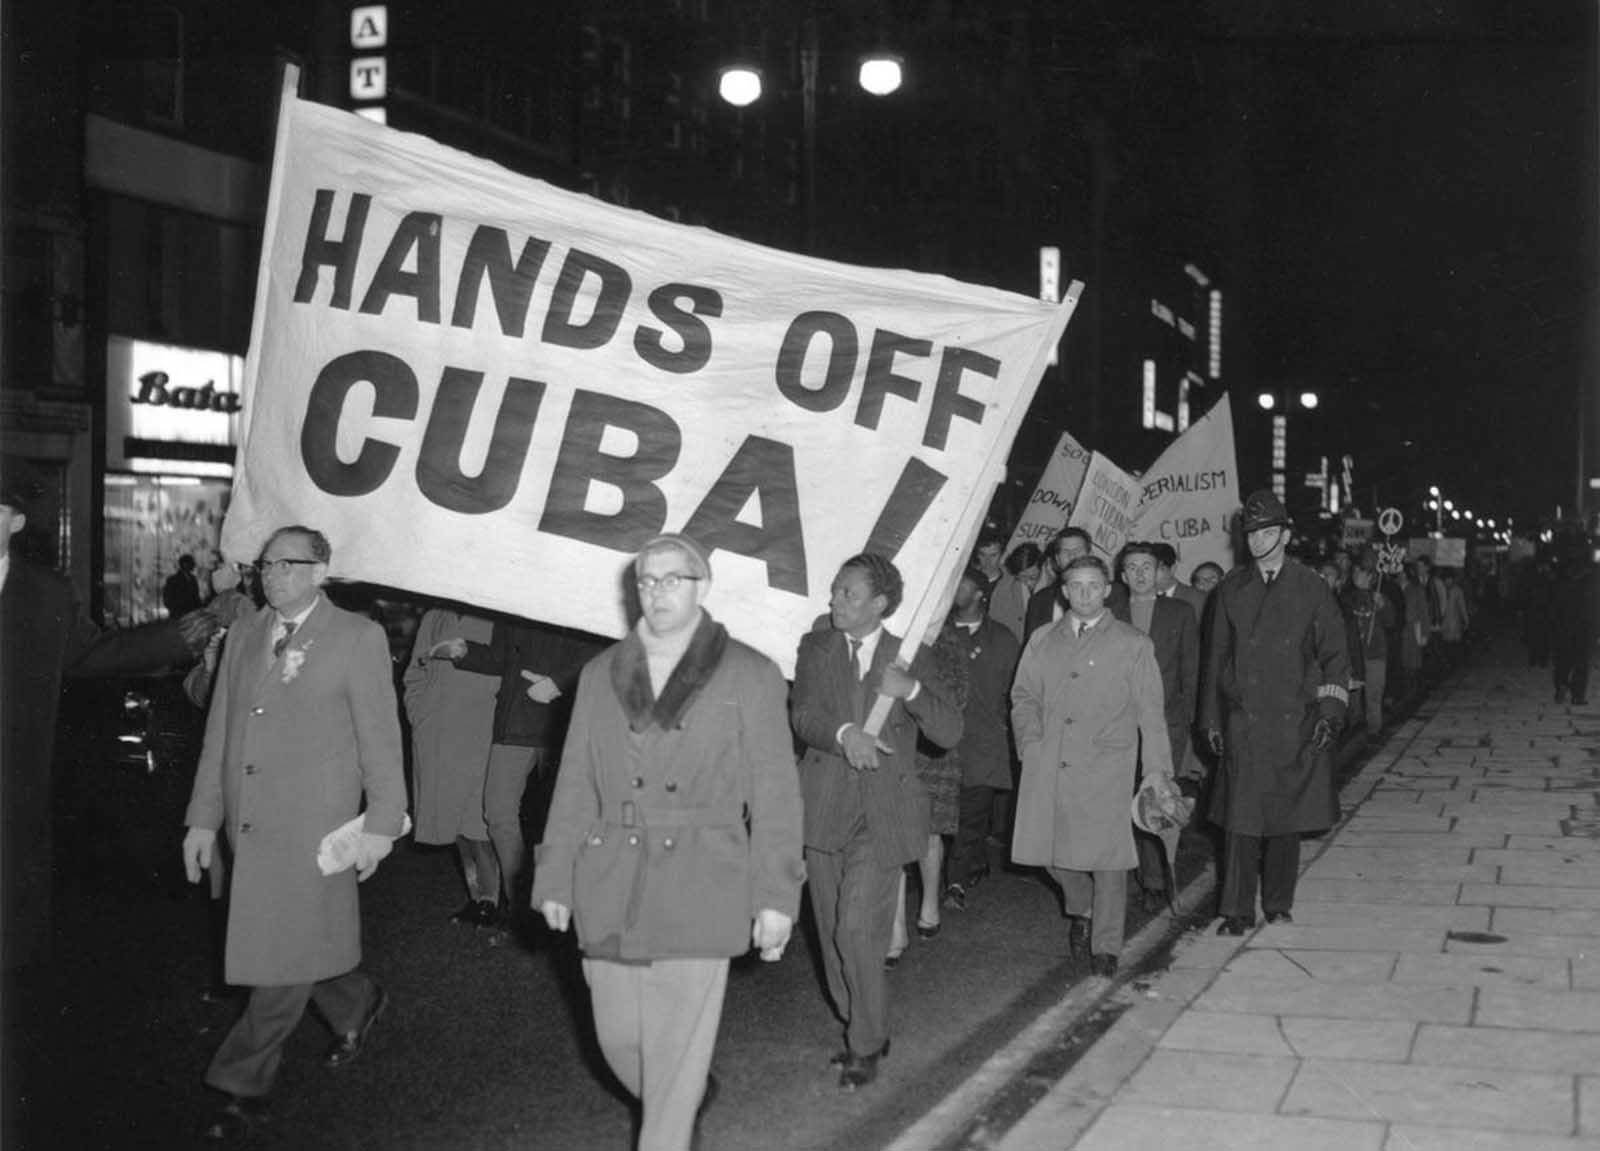 Members of the Campaign for Nuclear Disarmament (CND) march during a protest against the U.S. action over the Cuban missile crisis, on October 28, 1962 in London, England.